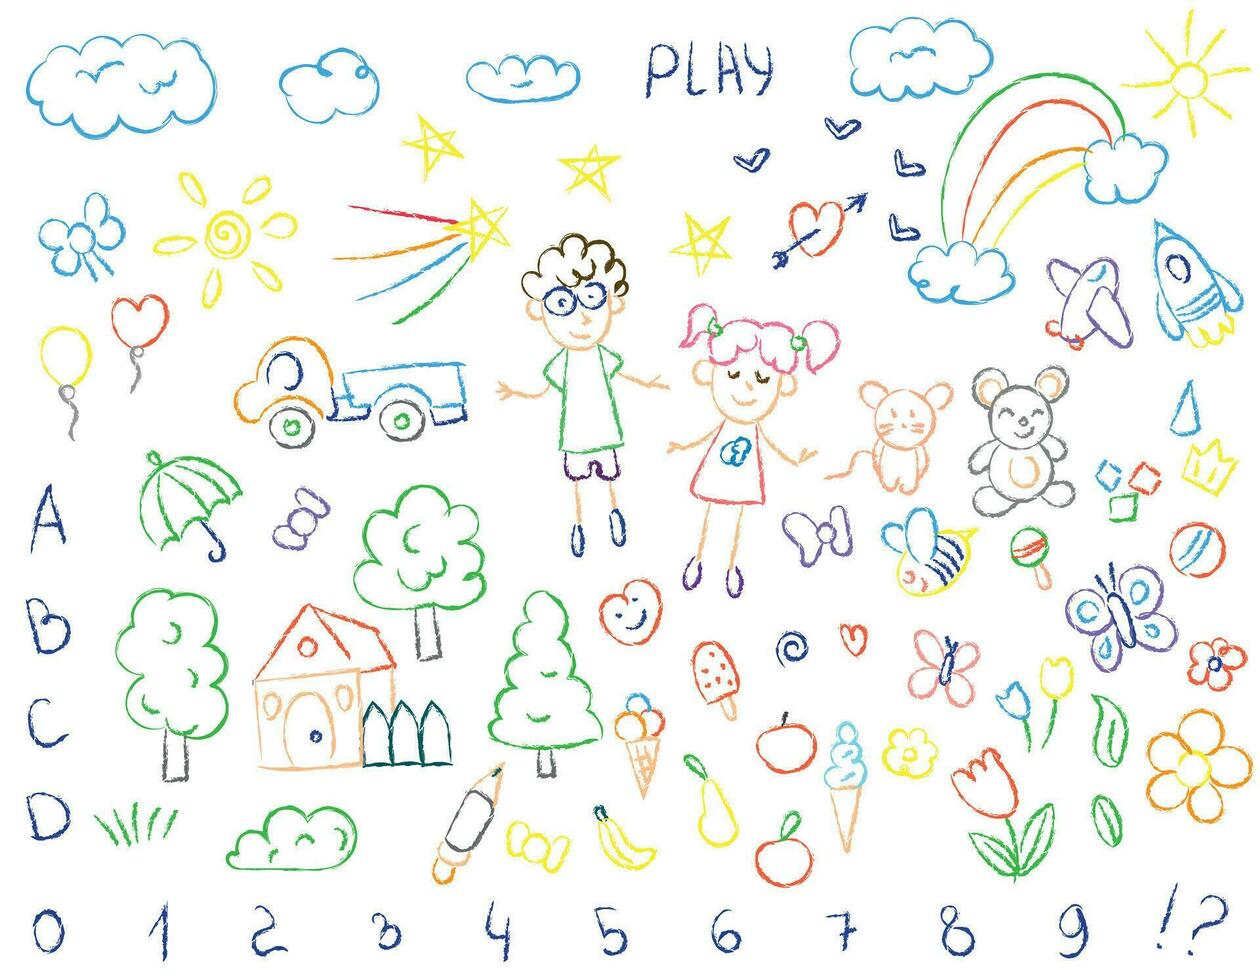 Set of children's scribbles, doodles with colored pencils. Children's drawings of flowers, plants, toys, numbers, objects, rainbows. Vector drawn with a brush